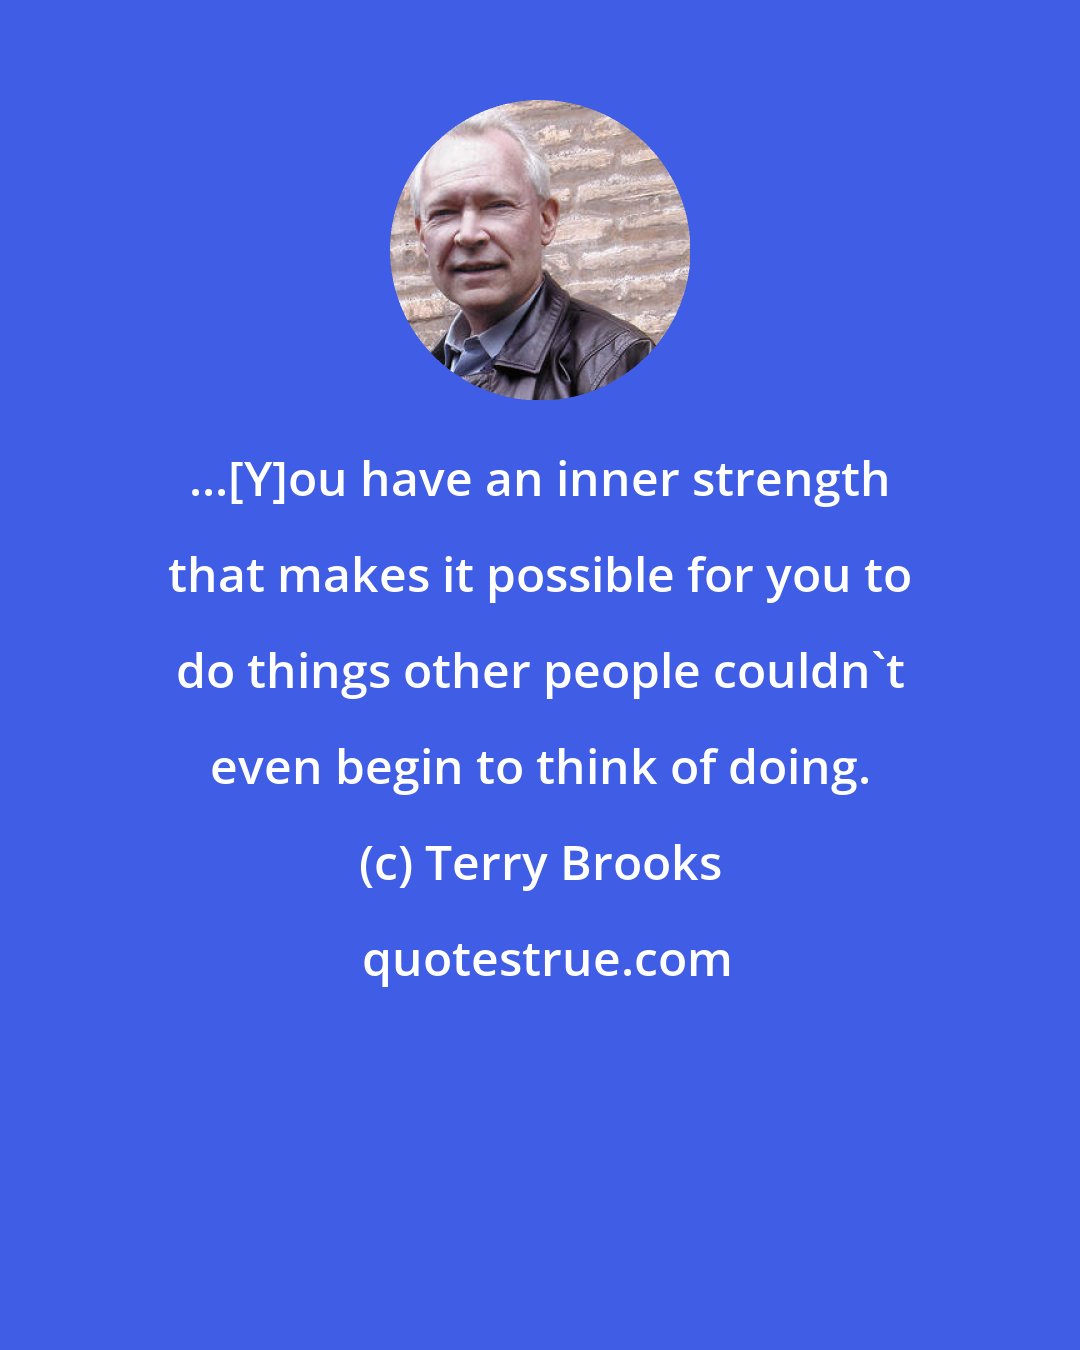 Terry Brooks: ...[Y]ou have an inner strength that makes it possible for you to do things other people couldn't even begin to think of doing.